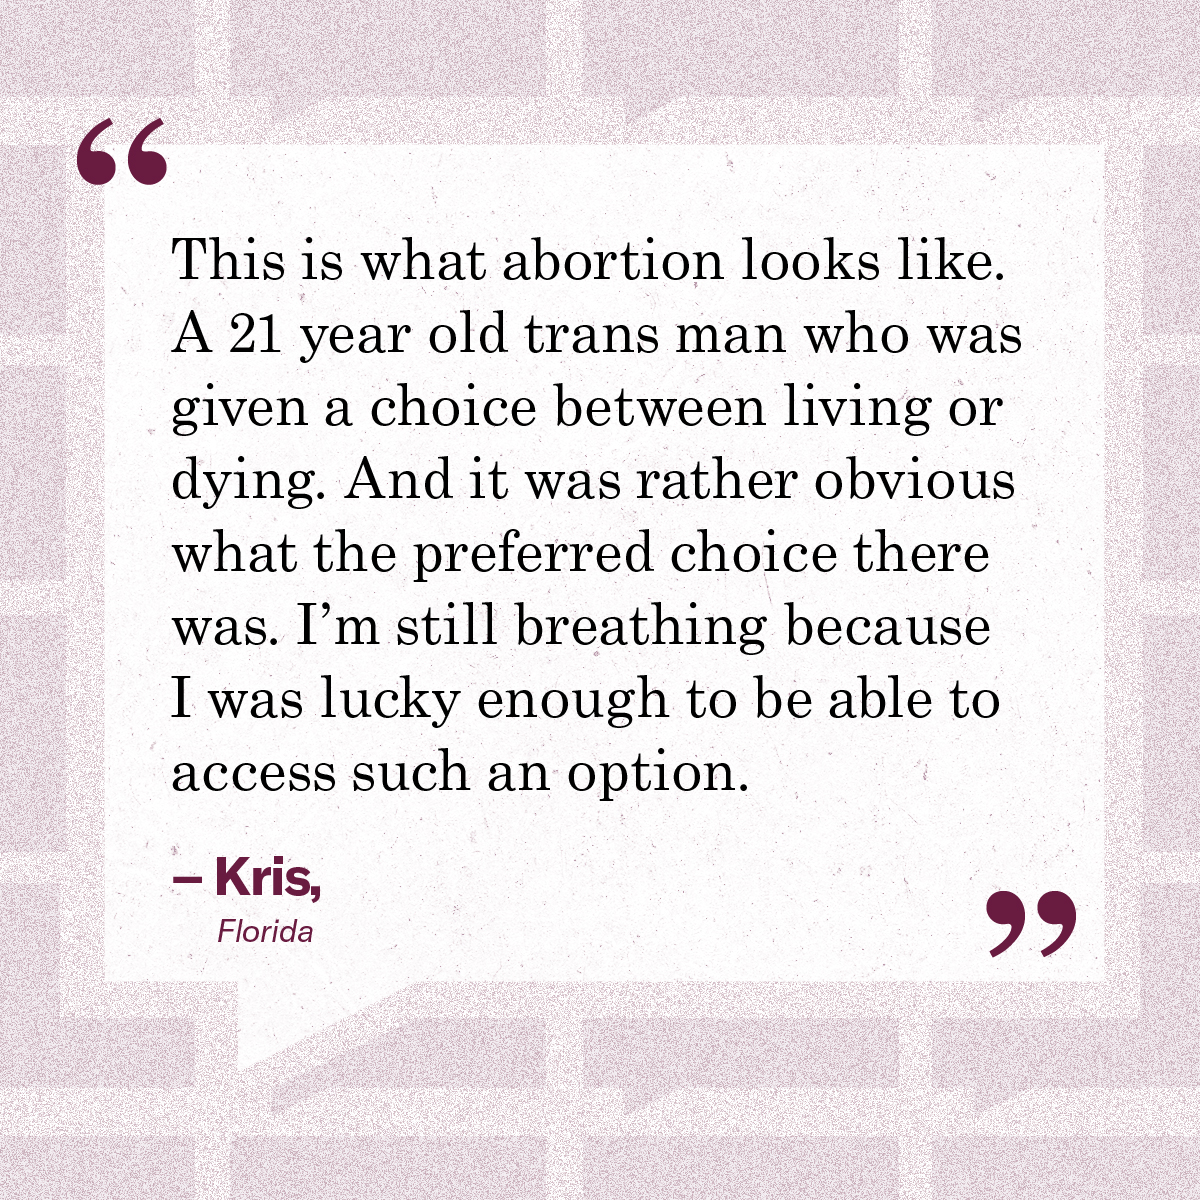 “This is what abortion looks like. A 21 year old trans man who was given a choice between living or dying. And it was rather obvious what the preferred choice there was. I’m still breathing because I was lucky enough to be able to access such an option.” – Kris, Florida